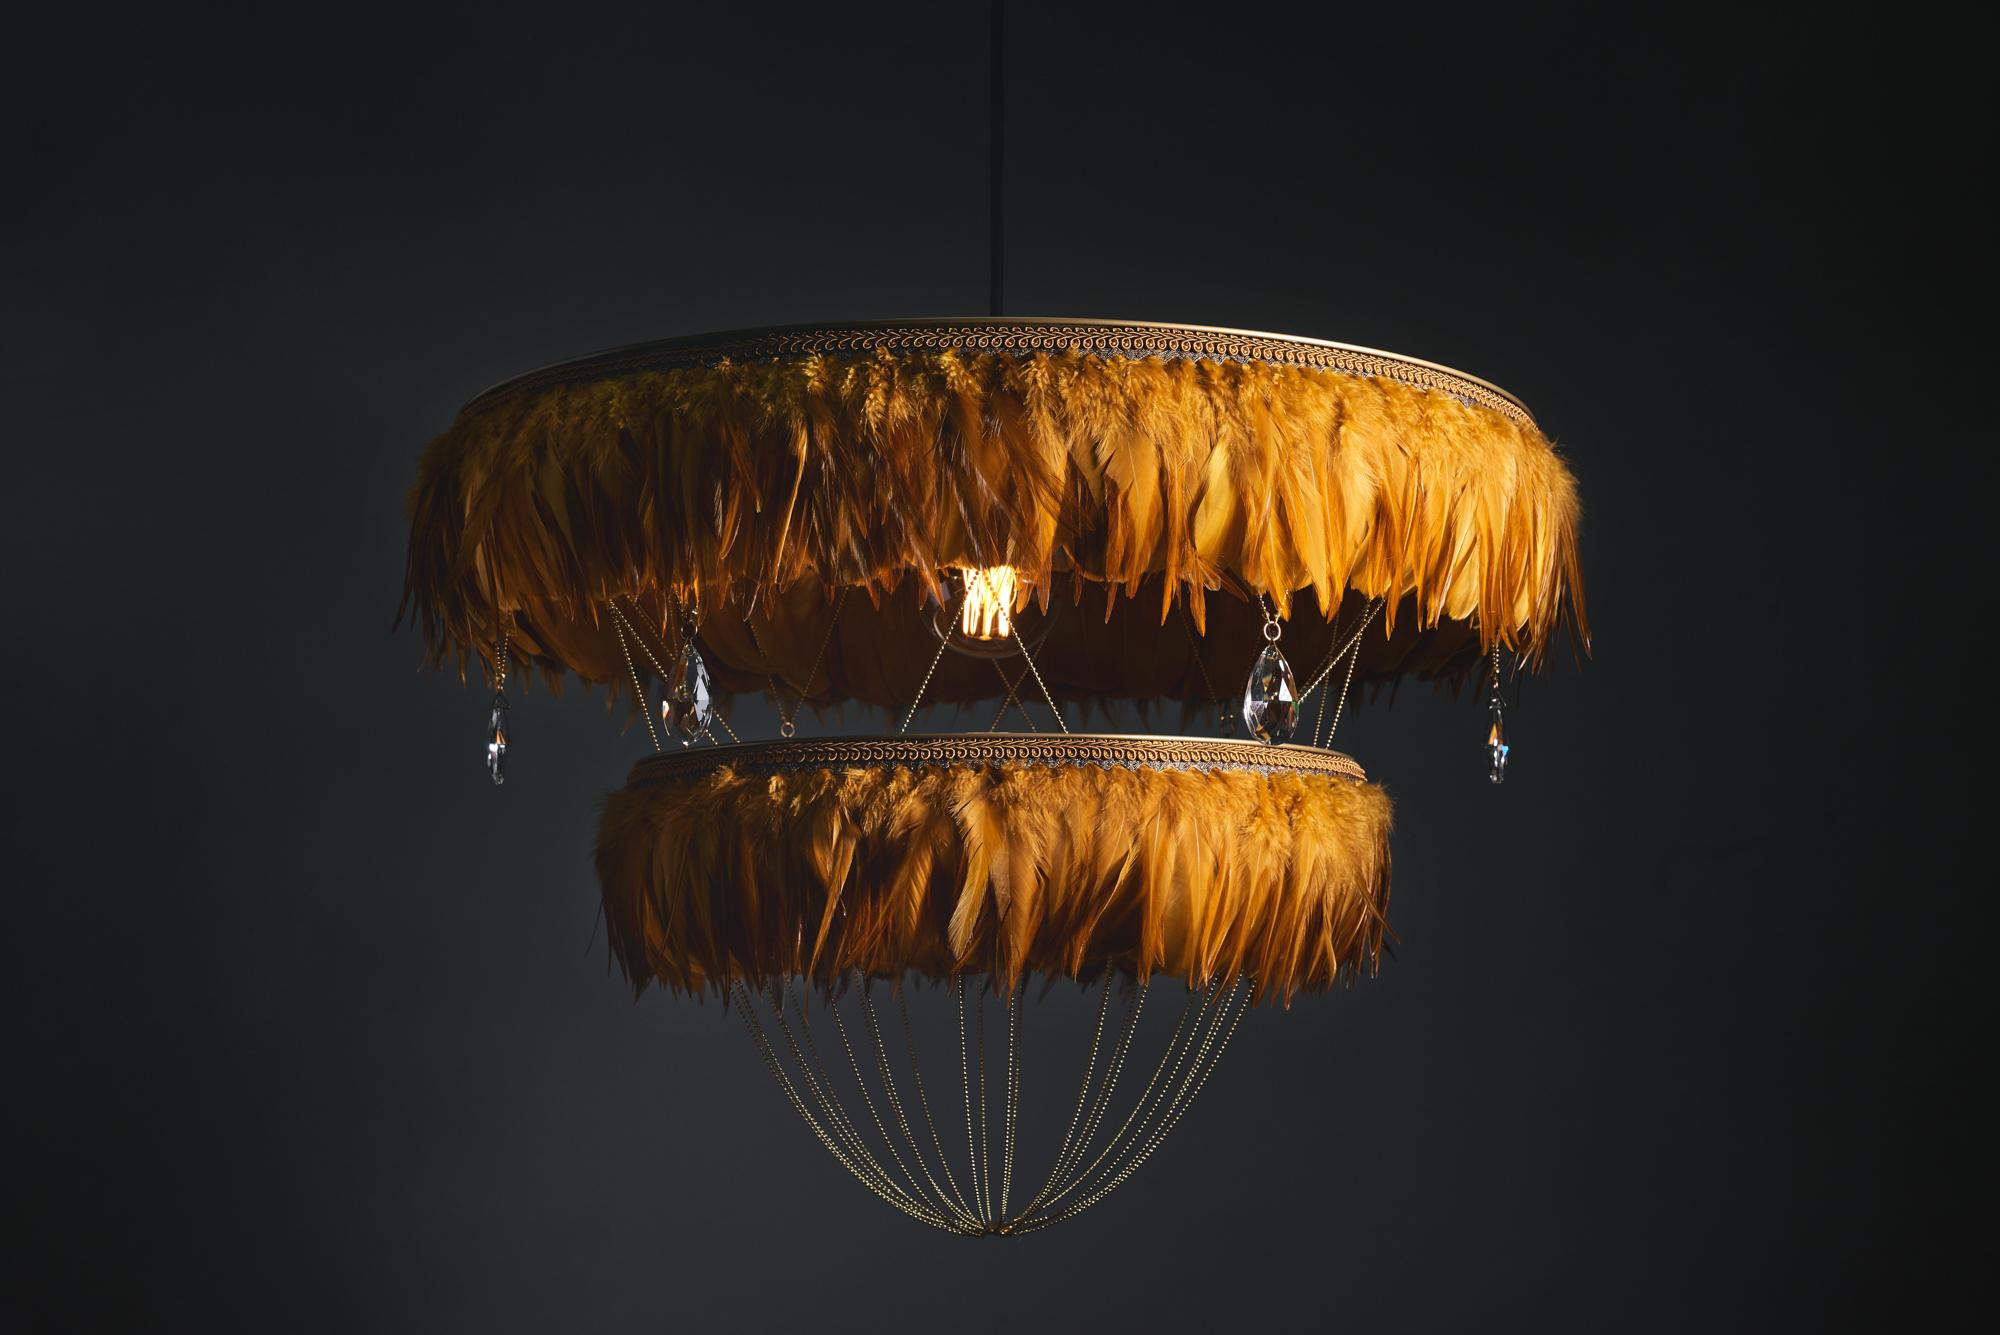 Contemporary Feather Chandelier in Mustard Yellow - Bertie -  Hand Made to order in London.  For Sale